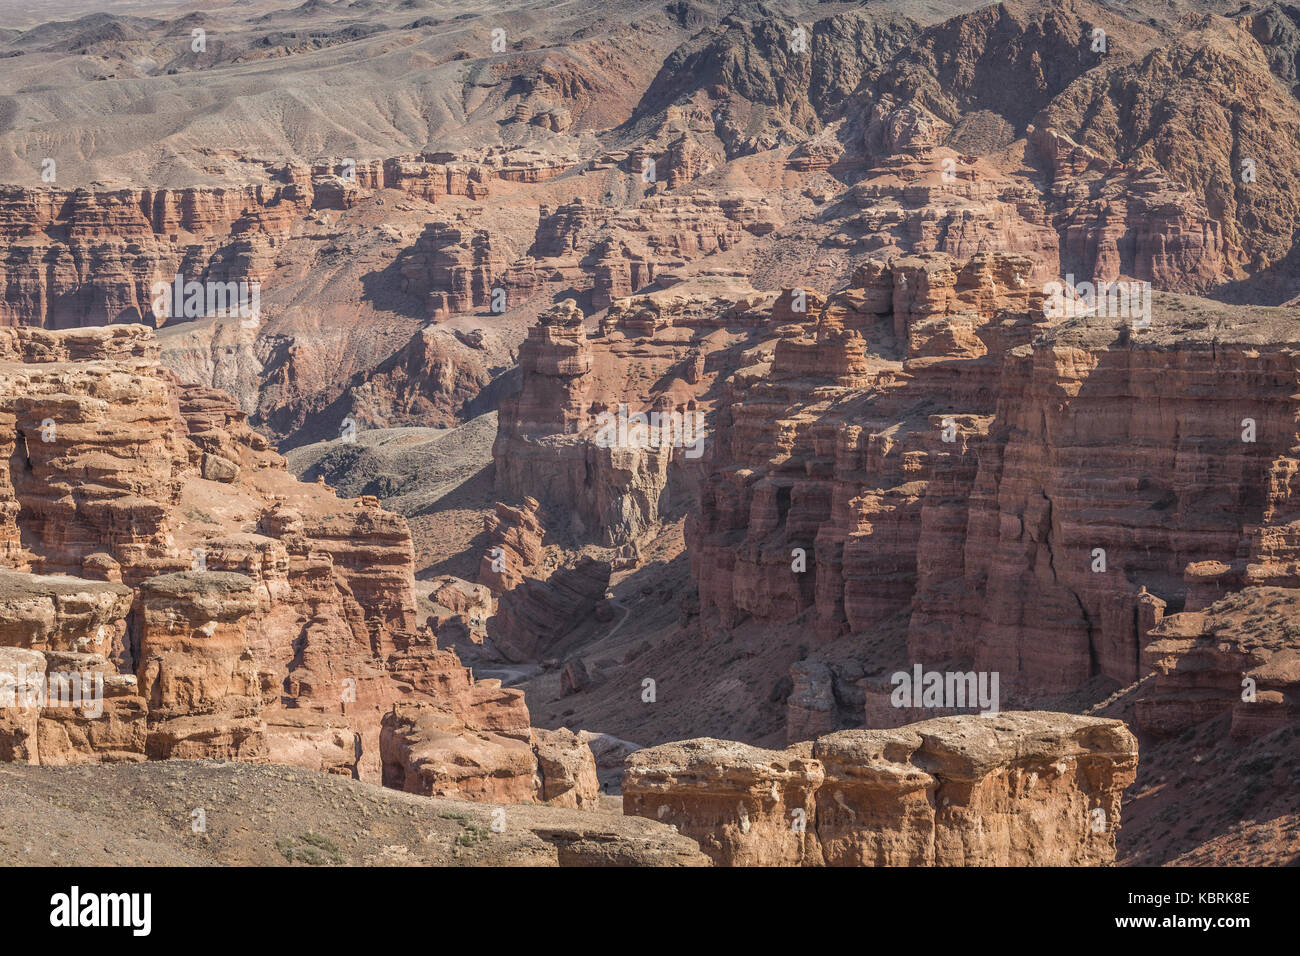 Charyn Canyon and the Valley of Castles, National park, Kazakhstan. Stock Photo